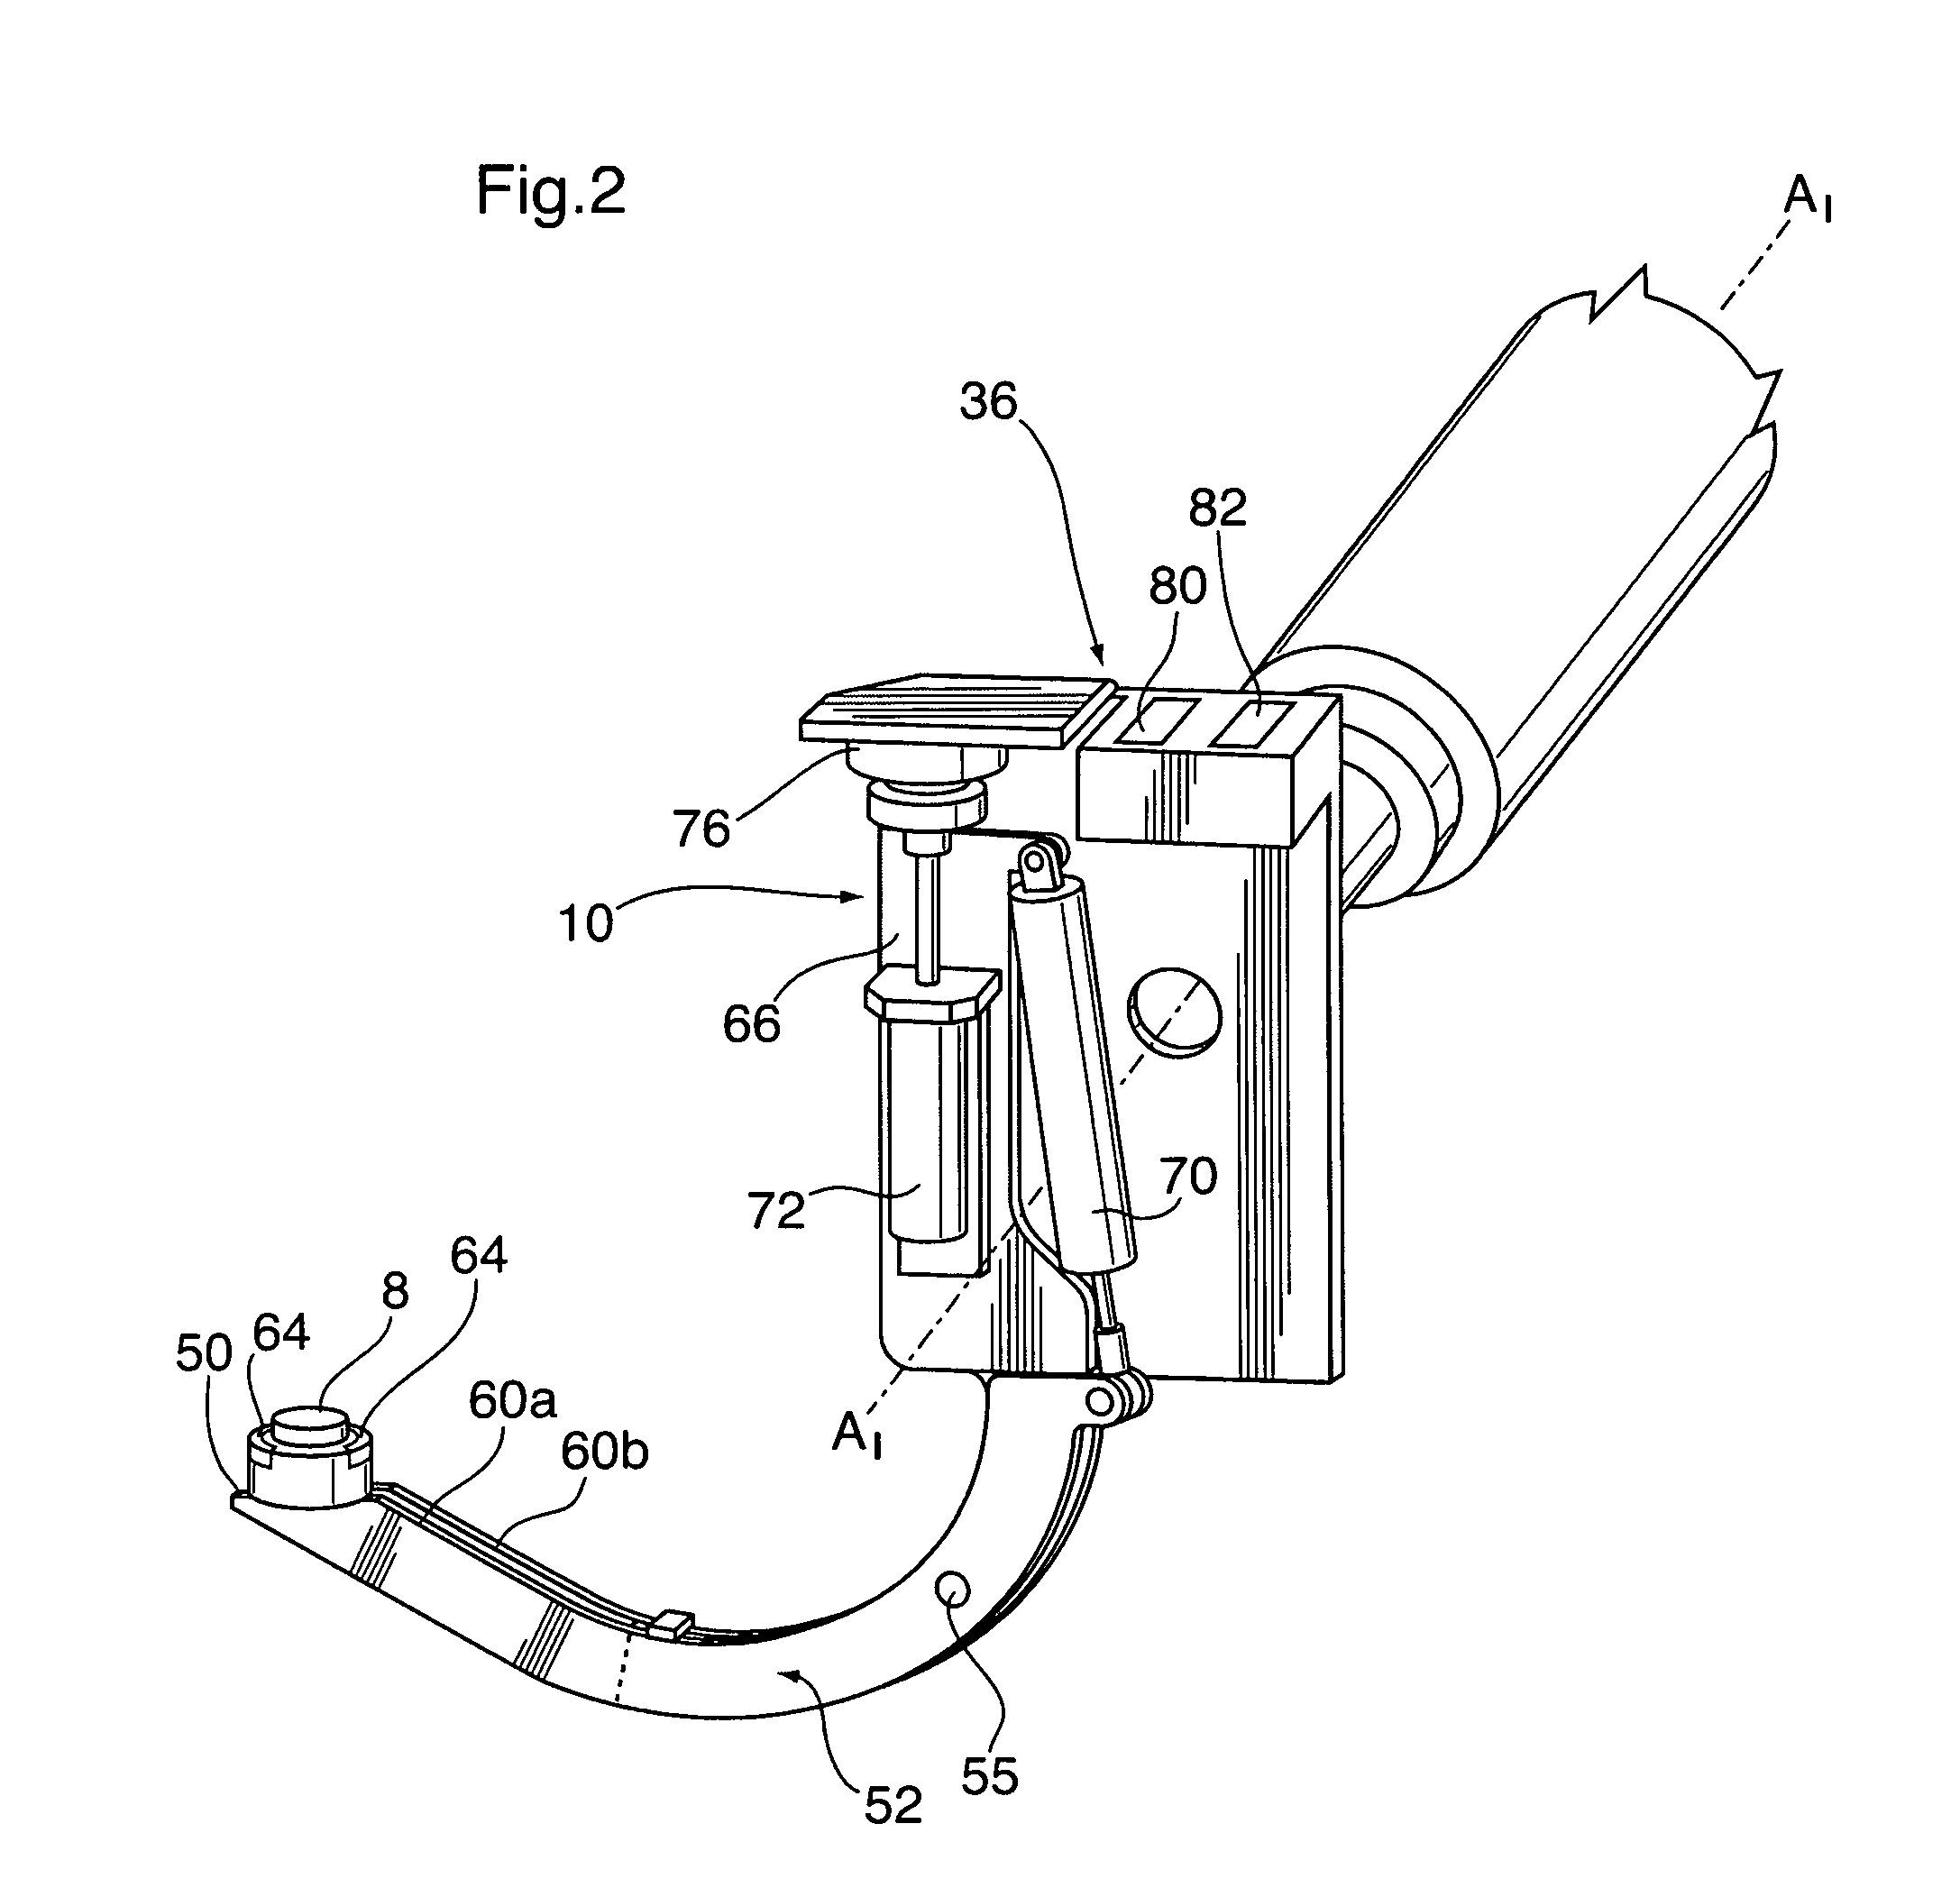 Coupling apparatus for positioning components in workpiece interior and method of using same